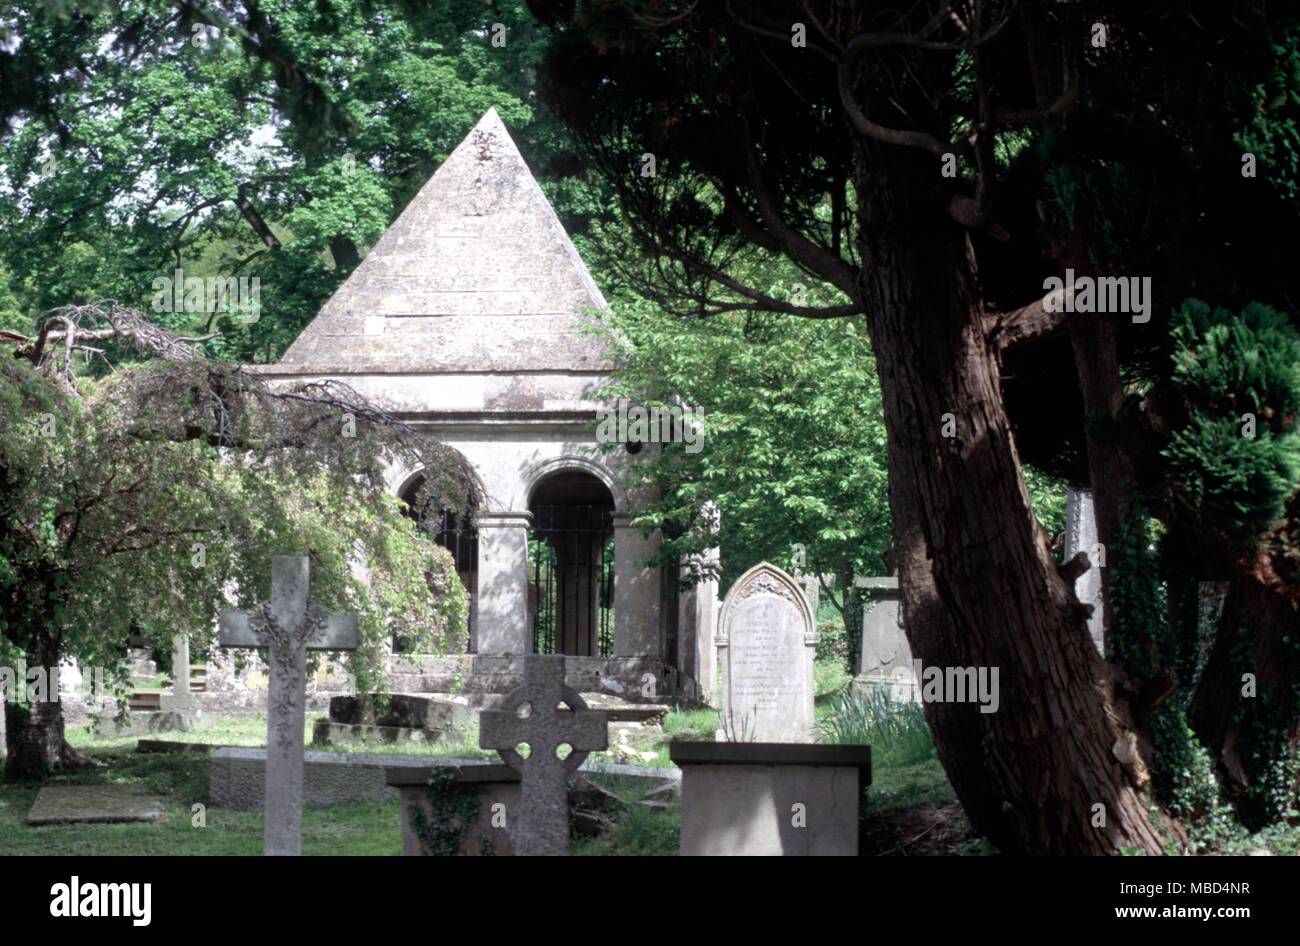 The pyramid-roofed mausoleum to Ralph Allen, who died in 1764. St. Mary's Churchyard, Claverton, near Bristol. © / Charles Walker Stock Photo